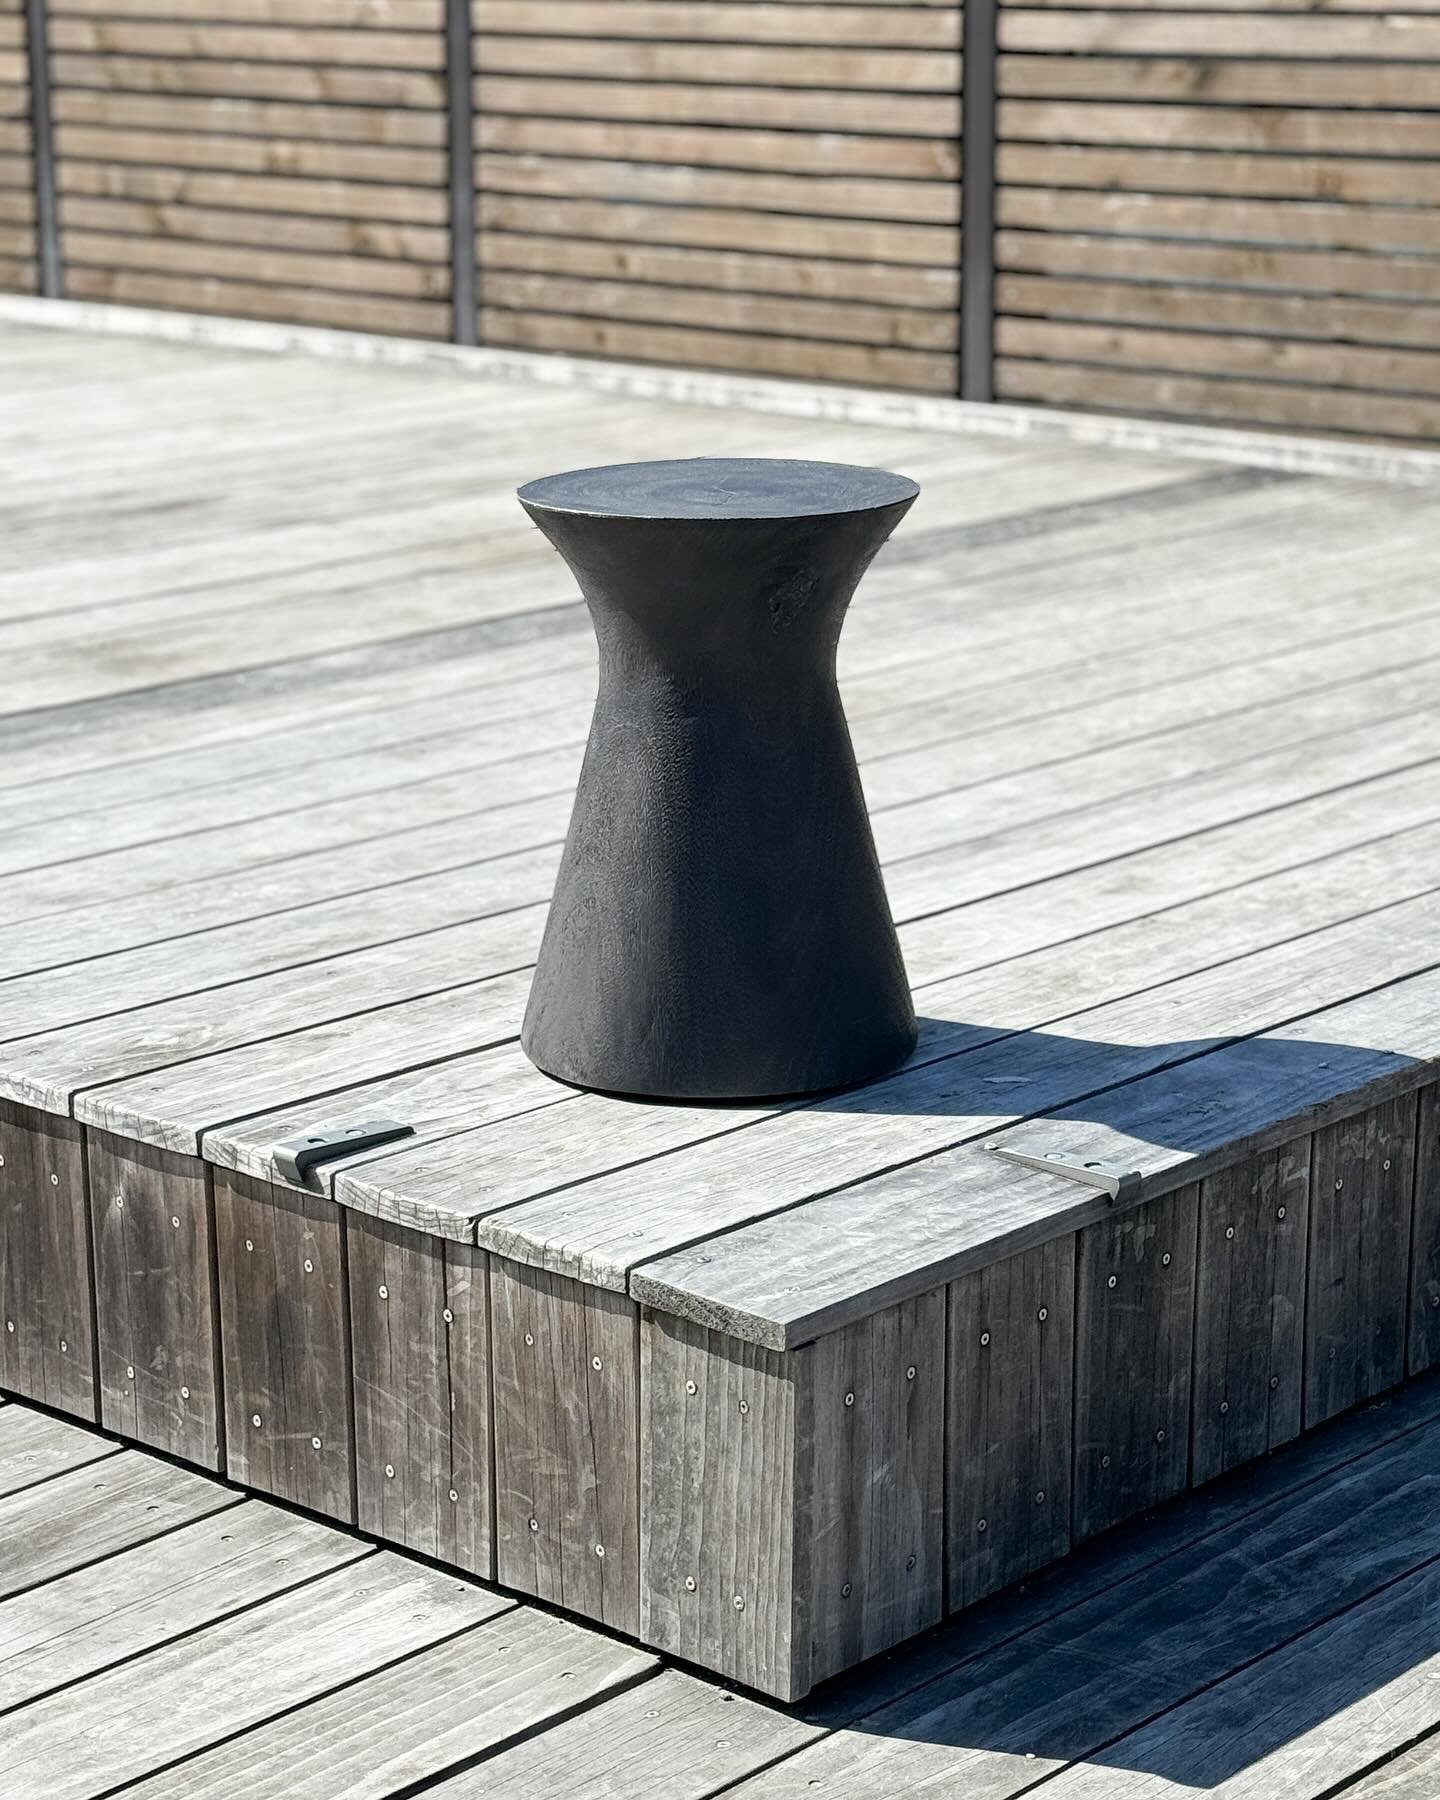 Check out the graining detail that comes through on this solid wood side table ⏩️ Dymen from Bernhardt Design

Psst&hellip; Dymen belongs inside with exceptions for sample deliveries. 😉